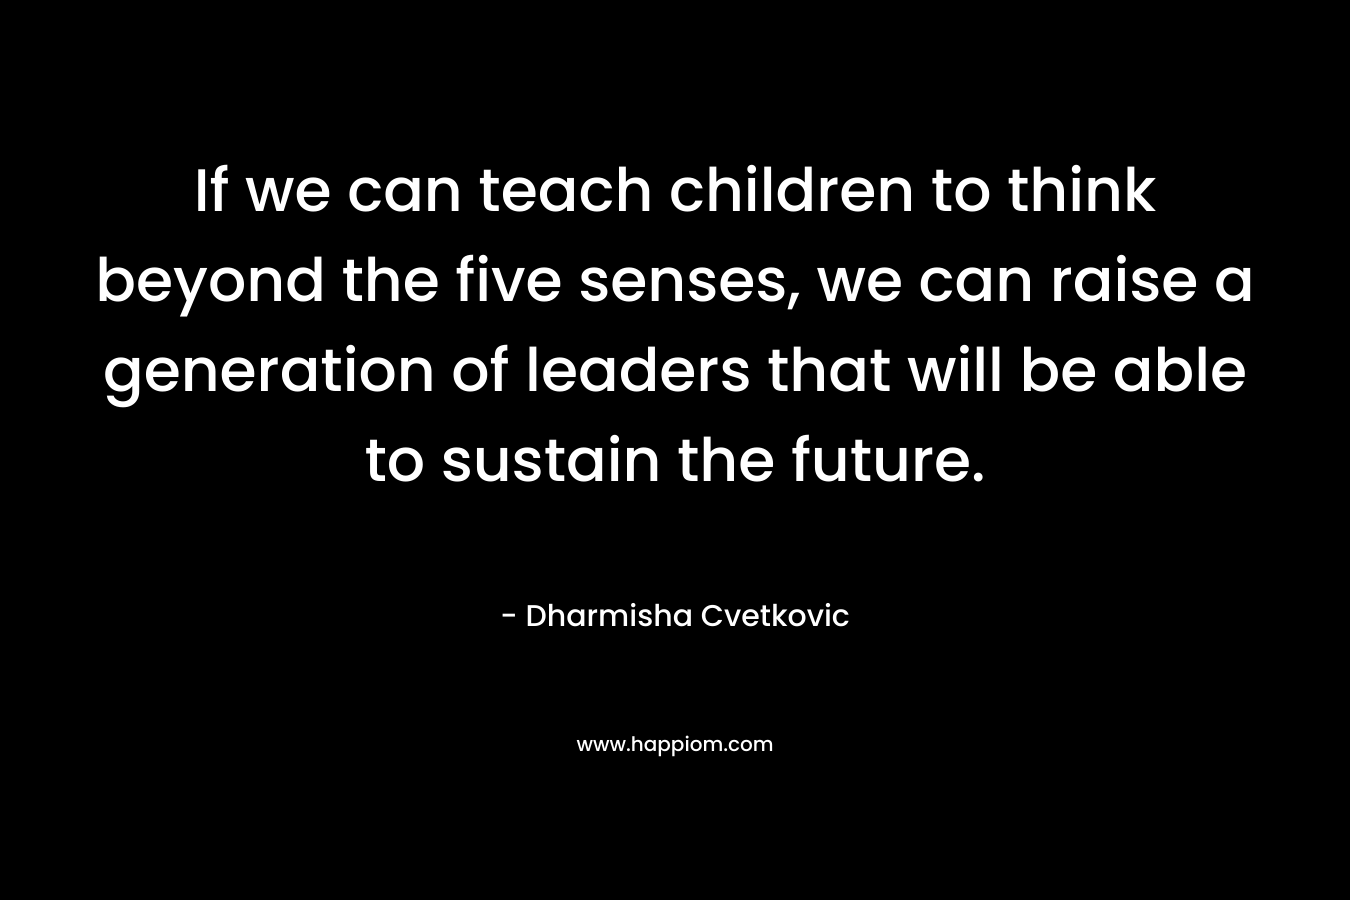 If we can teach children to think beyond the five senses, we can raise a generation of leaders that will be able to sustain the future.